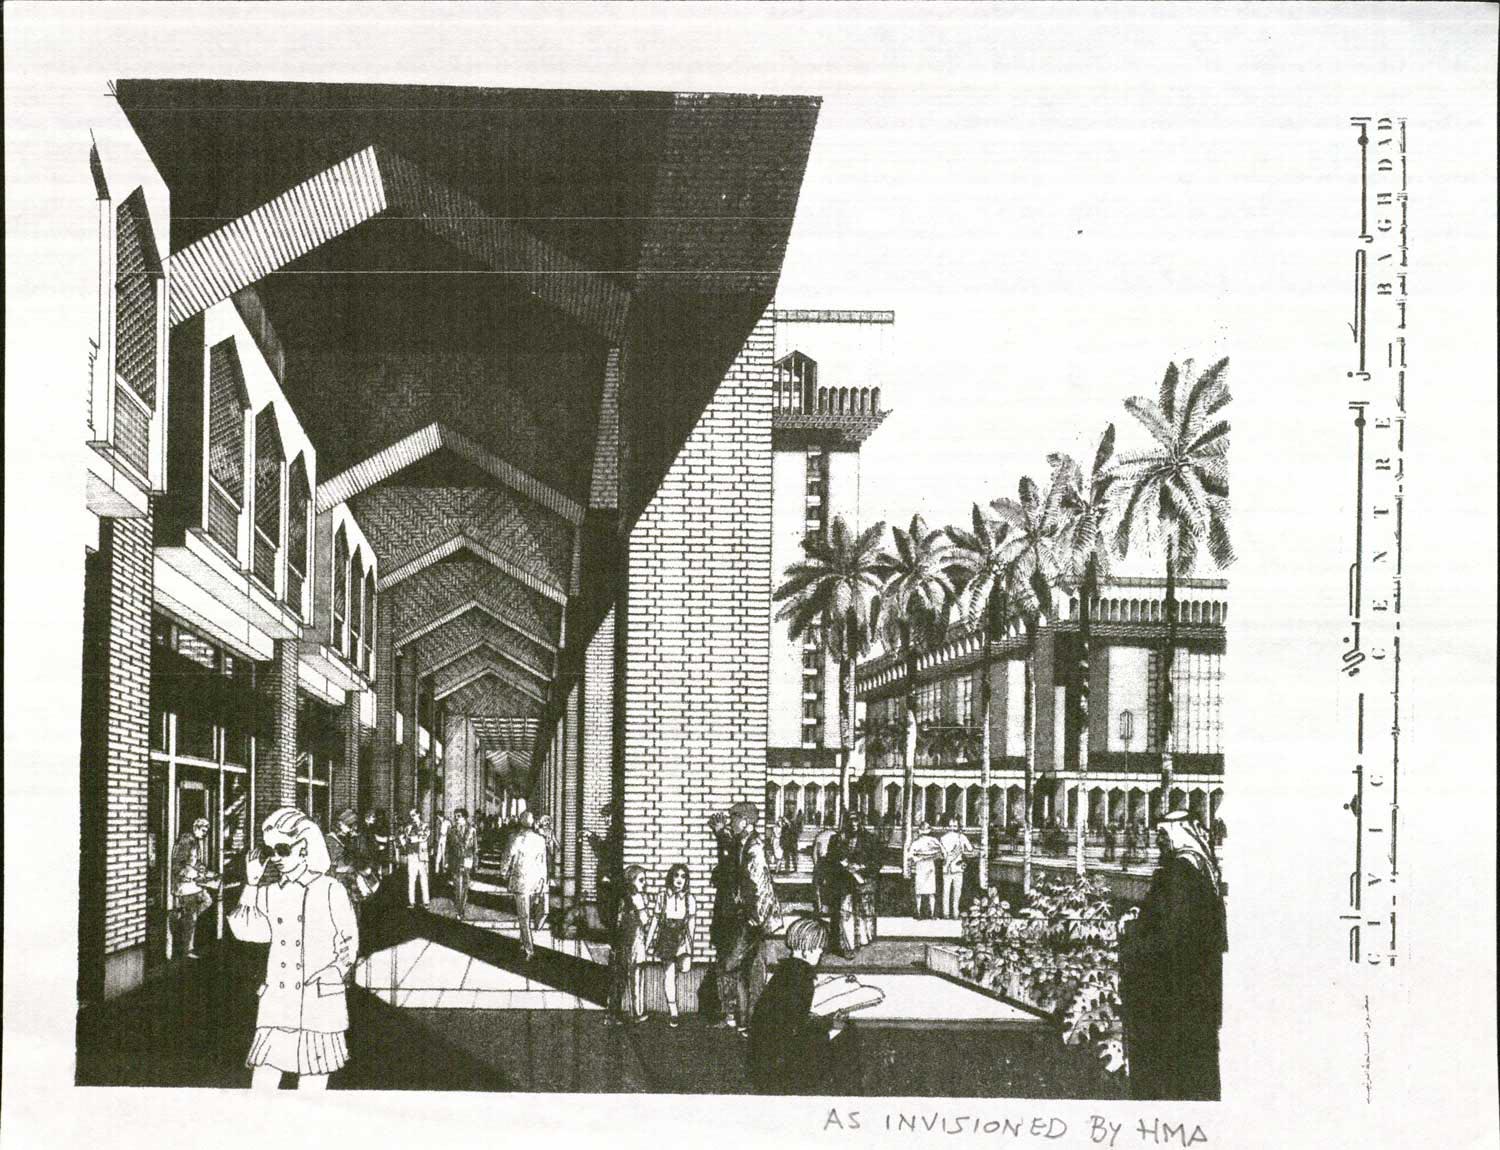 Architectural rendering showing the concept for the Mayor's Office Building, showing pedestrians beneath the brick colonnade.